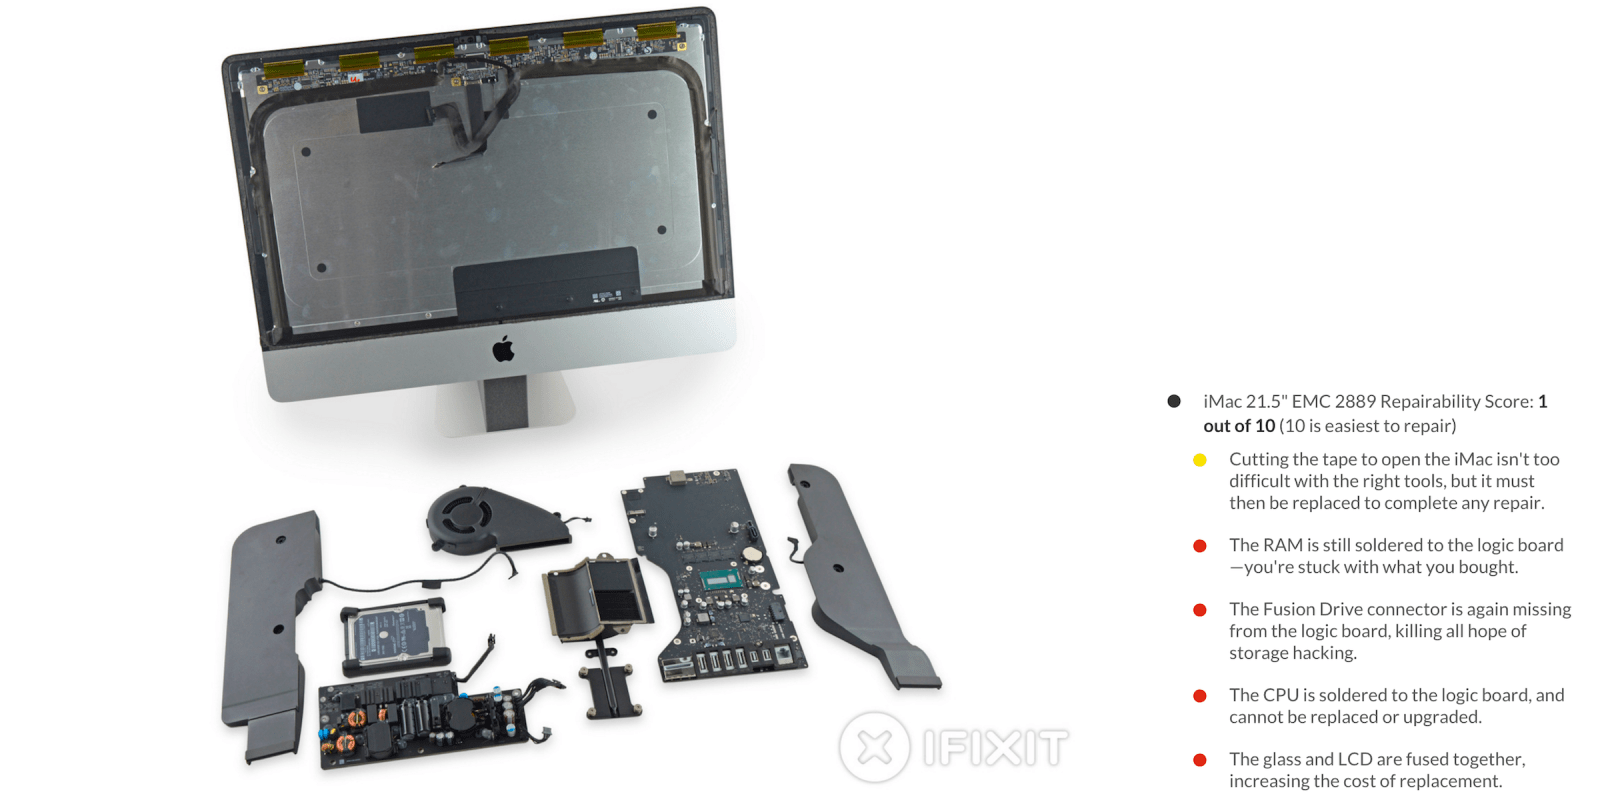 21.5-inch iMac least repairable due to lack of RAM, hard drive upgradability 9to5Mac